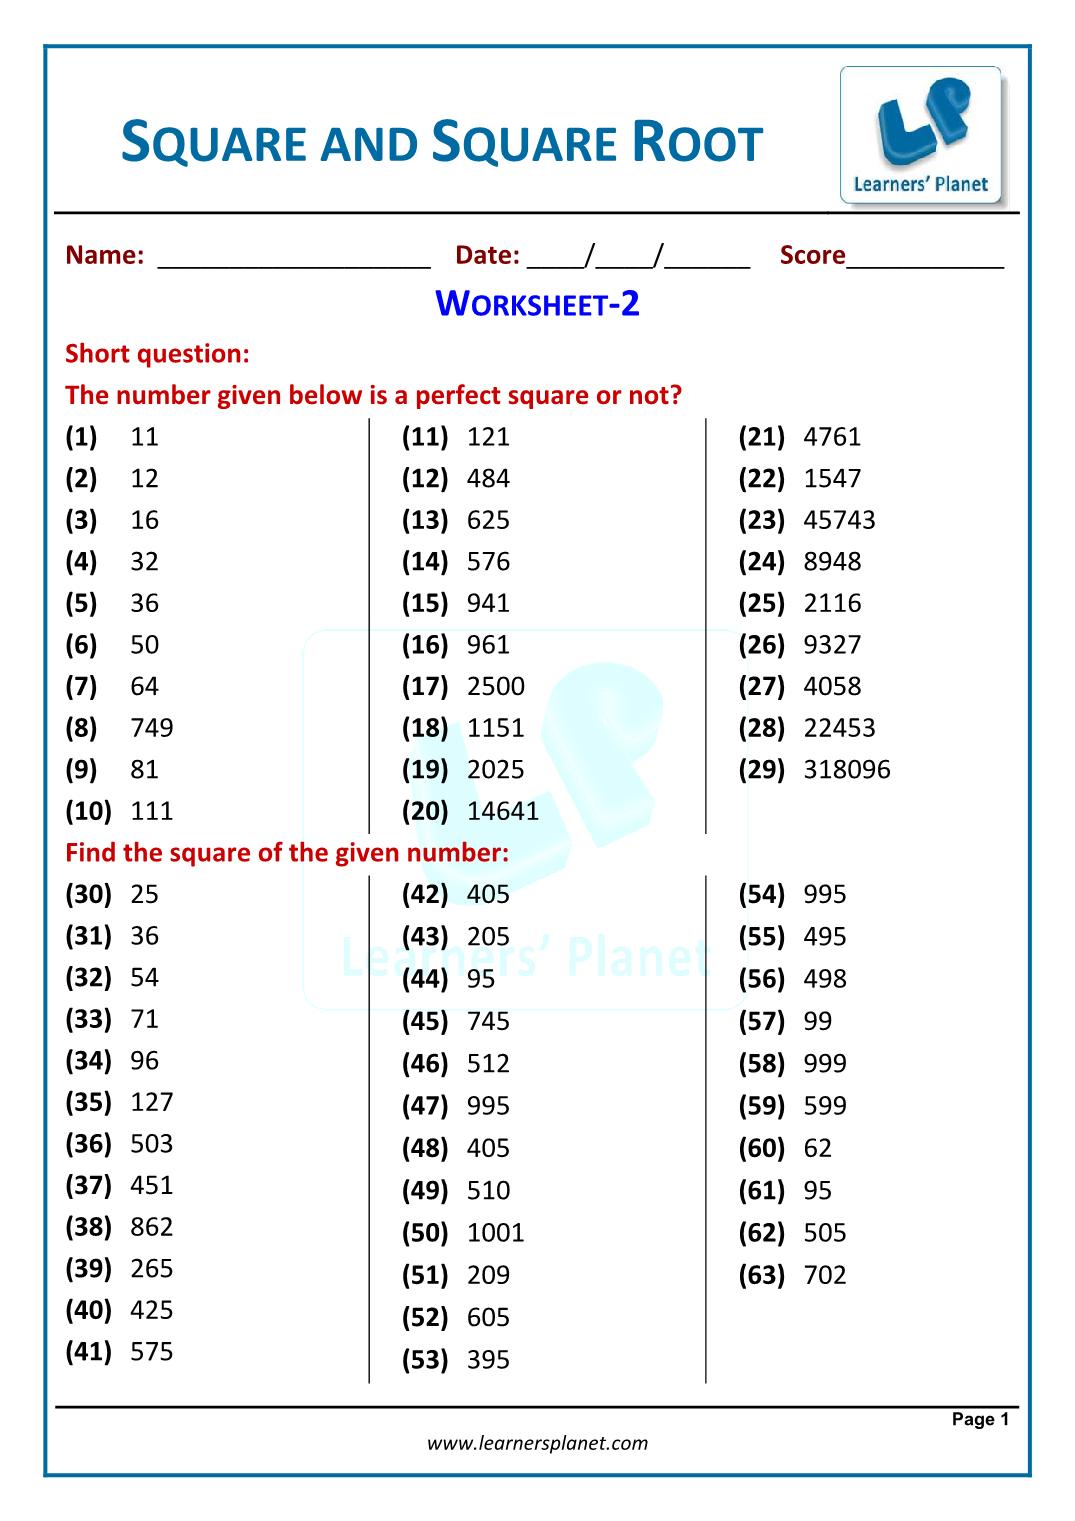 NCERT grade viii math squares and square roots videos, quiz With Regard To Squares And Square Roots Worksheet